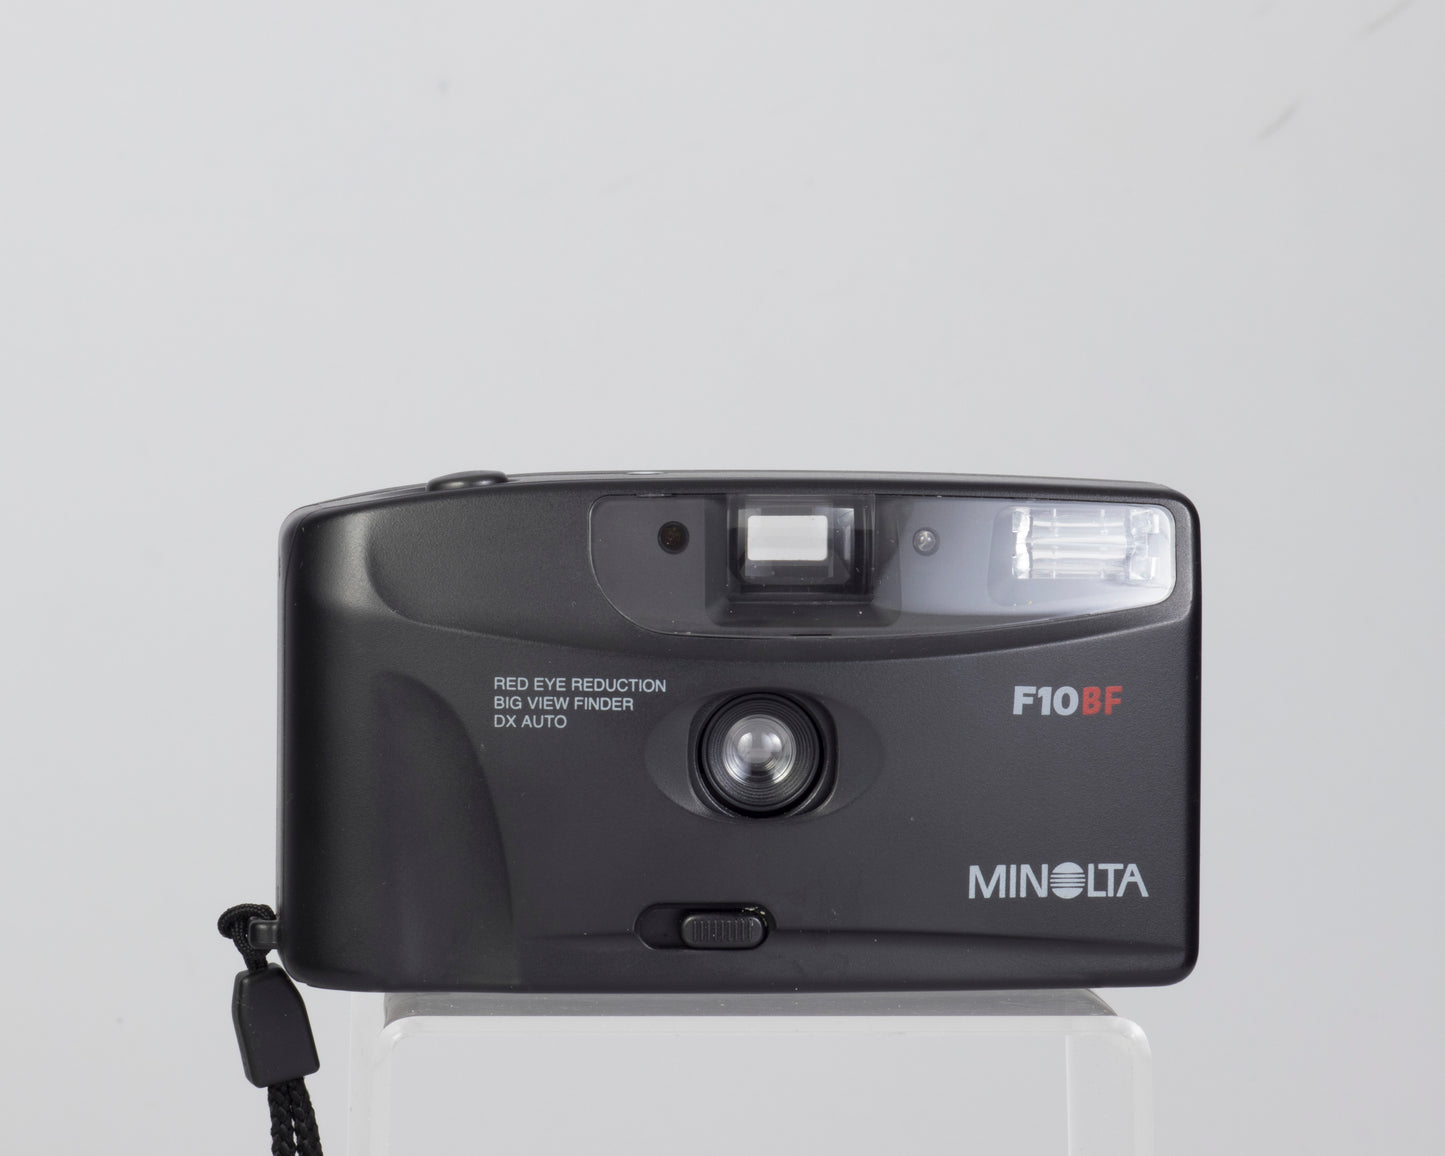 The Minolta F10BF is a simple 35mm point-and-shoot camera from the 1990s